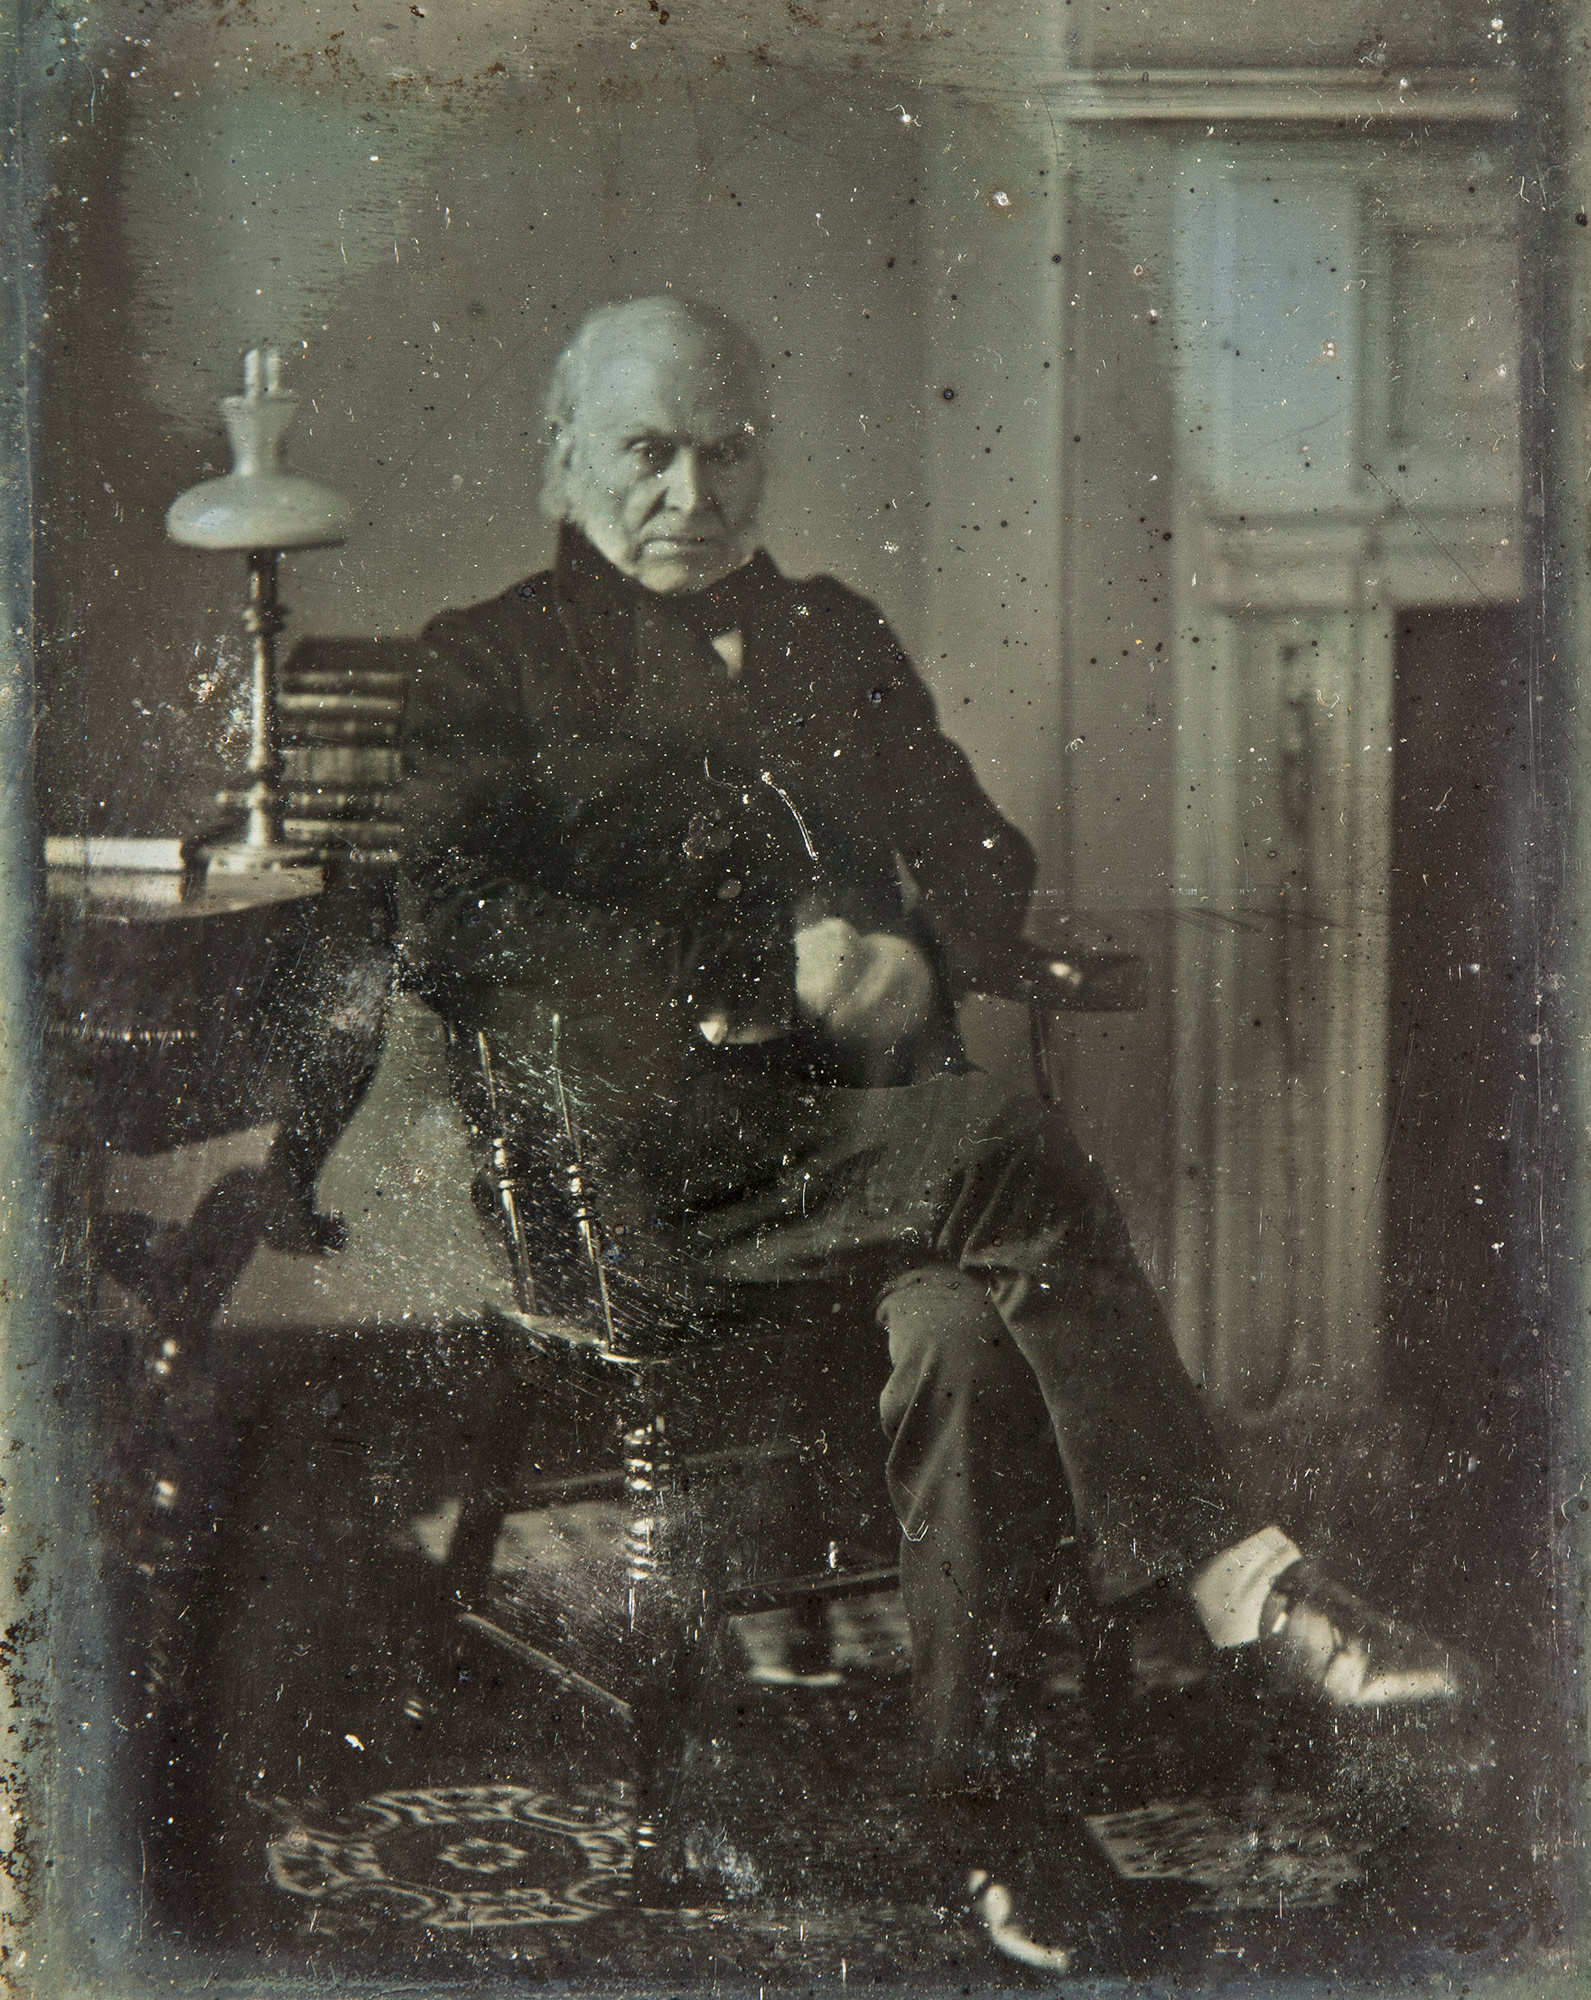 Lost For Over A Century, This Is Now The Oldest Known Original Photo Of A US President